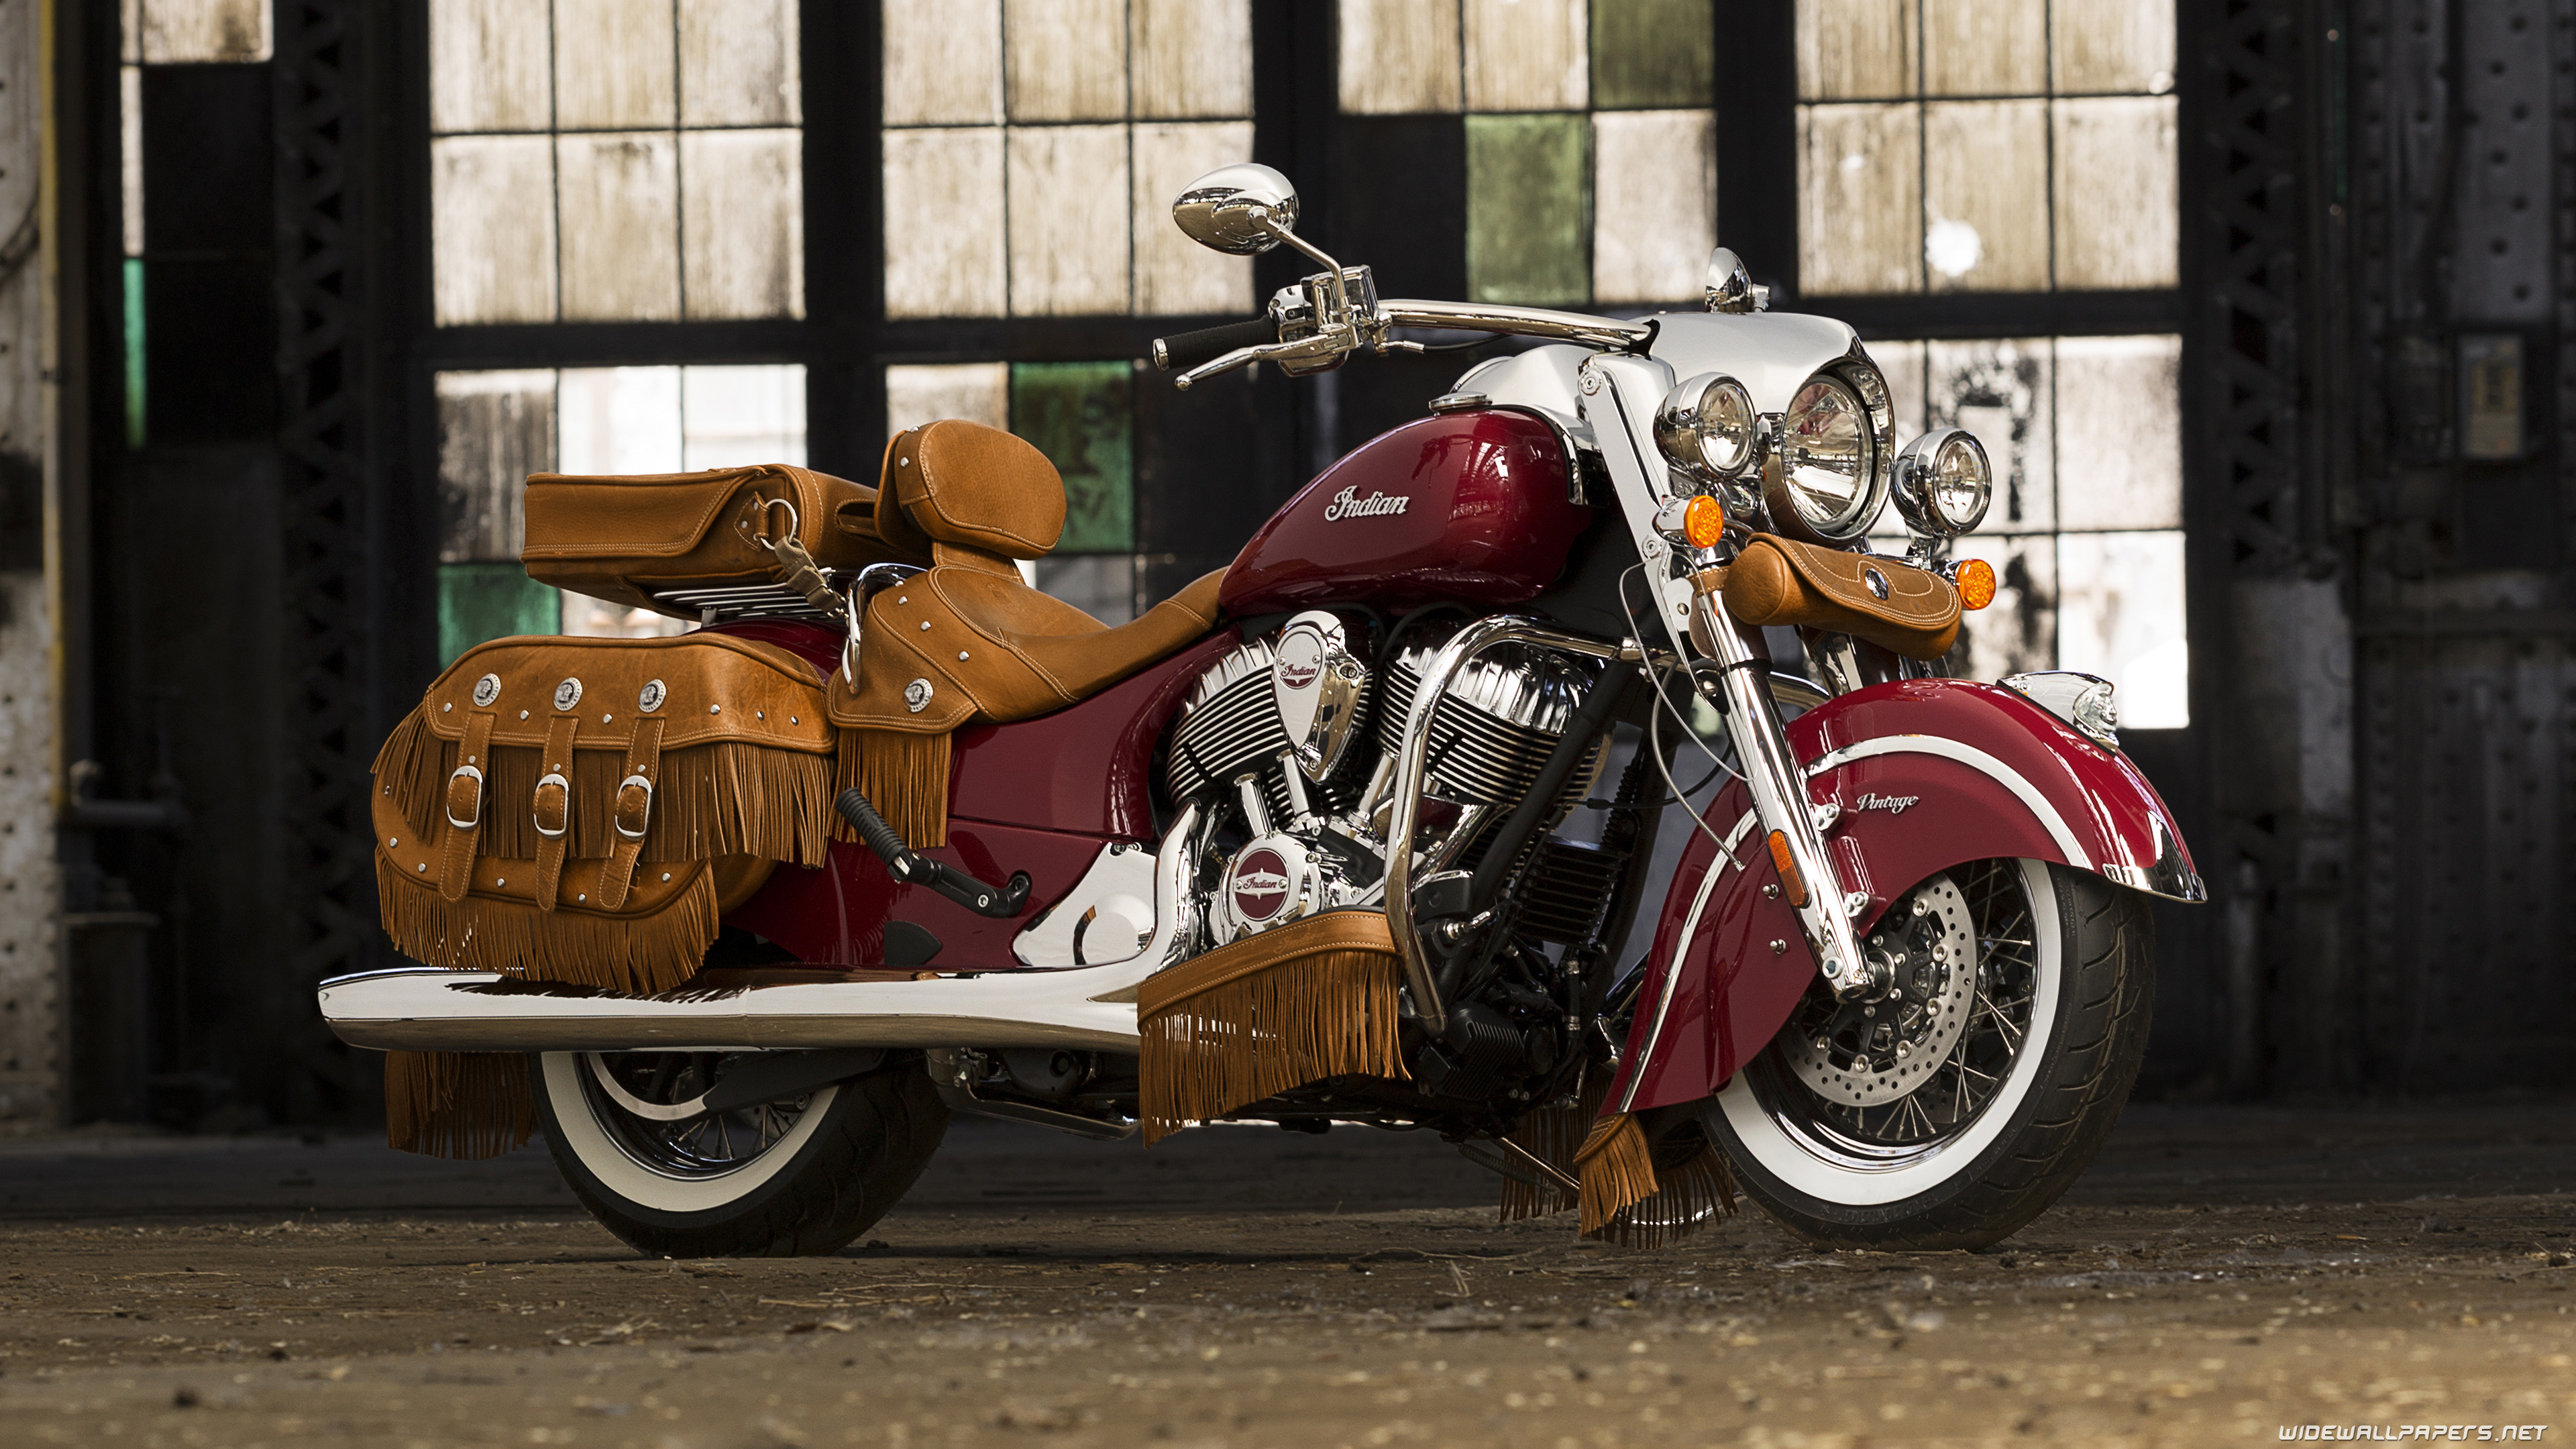 3840x2160 Indian Chief Vintage motorcycle wallpapers ...